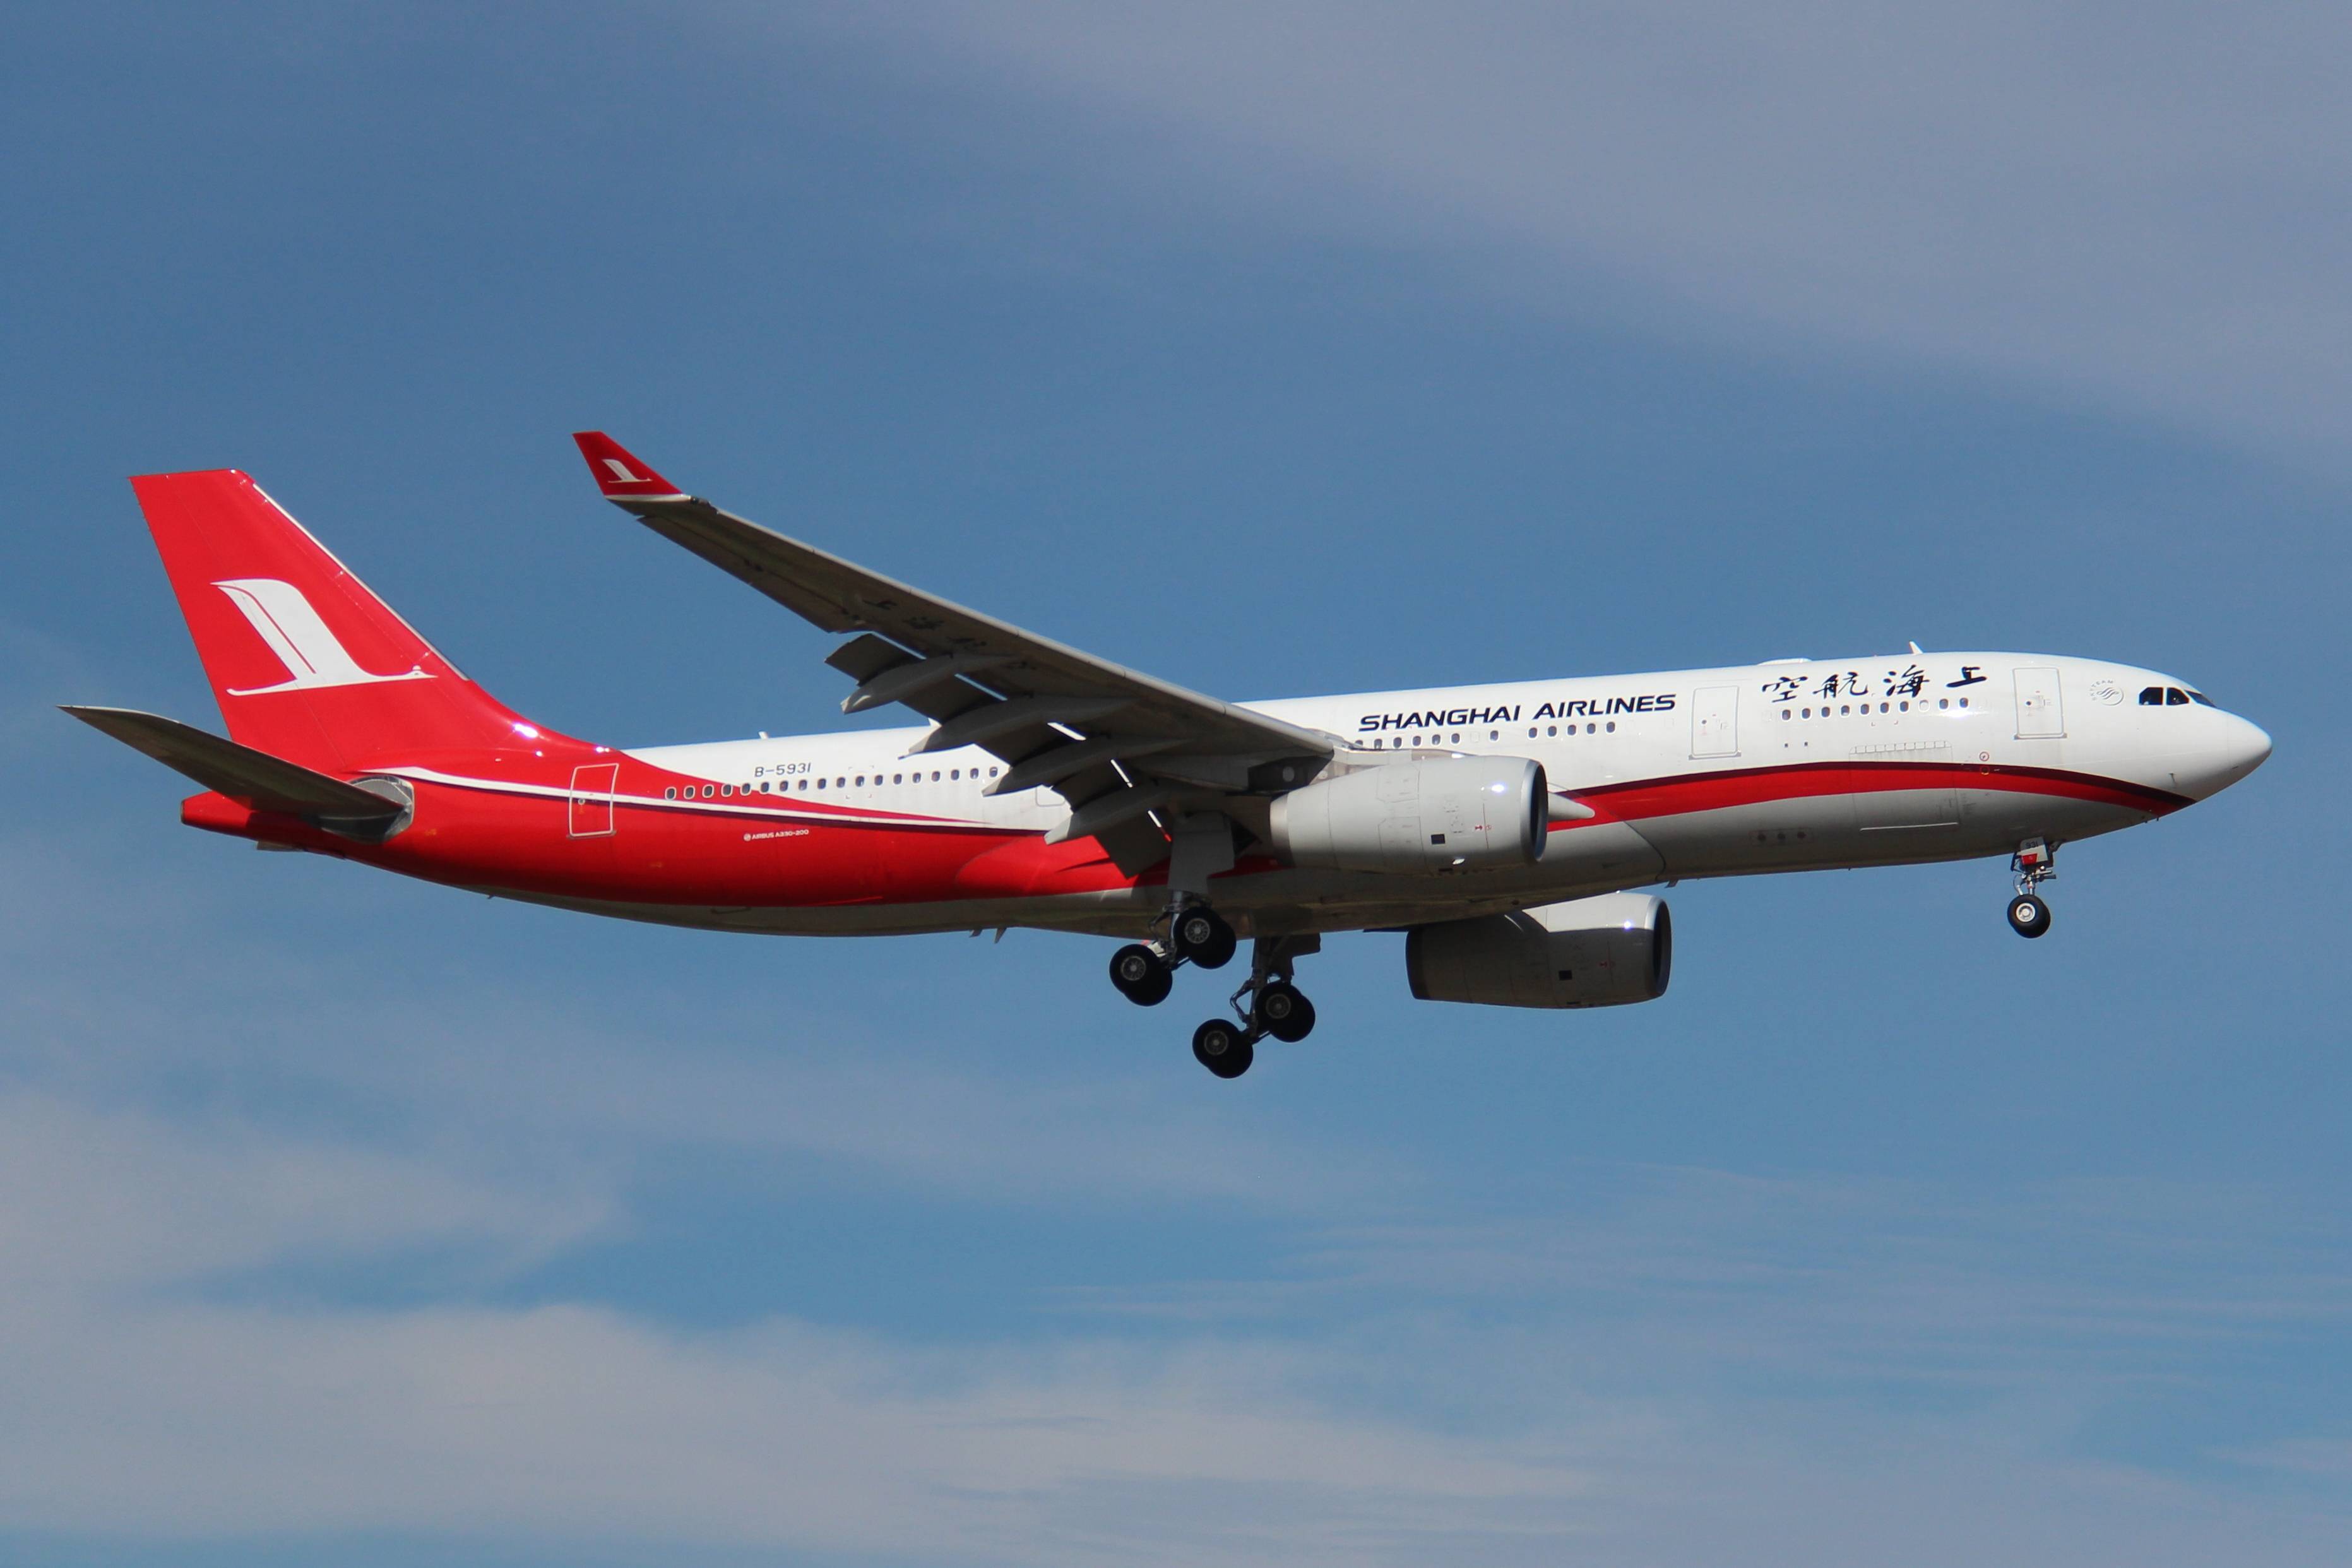 Shanghai airlines | book flights and save